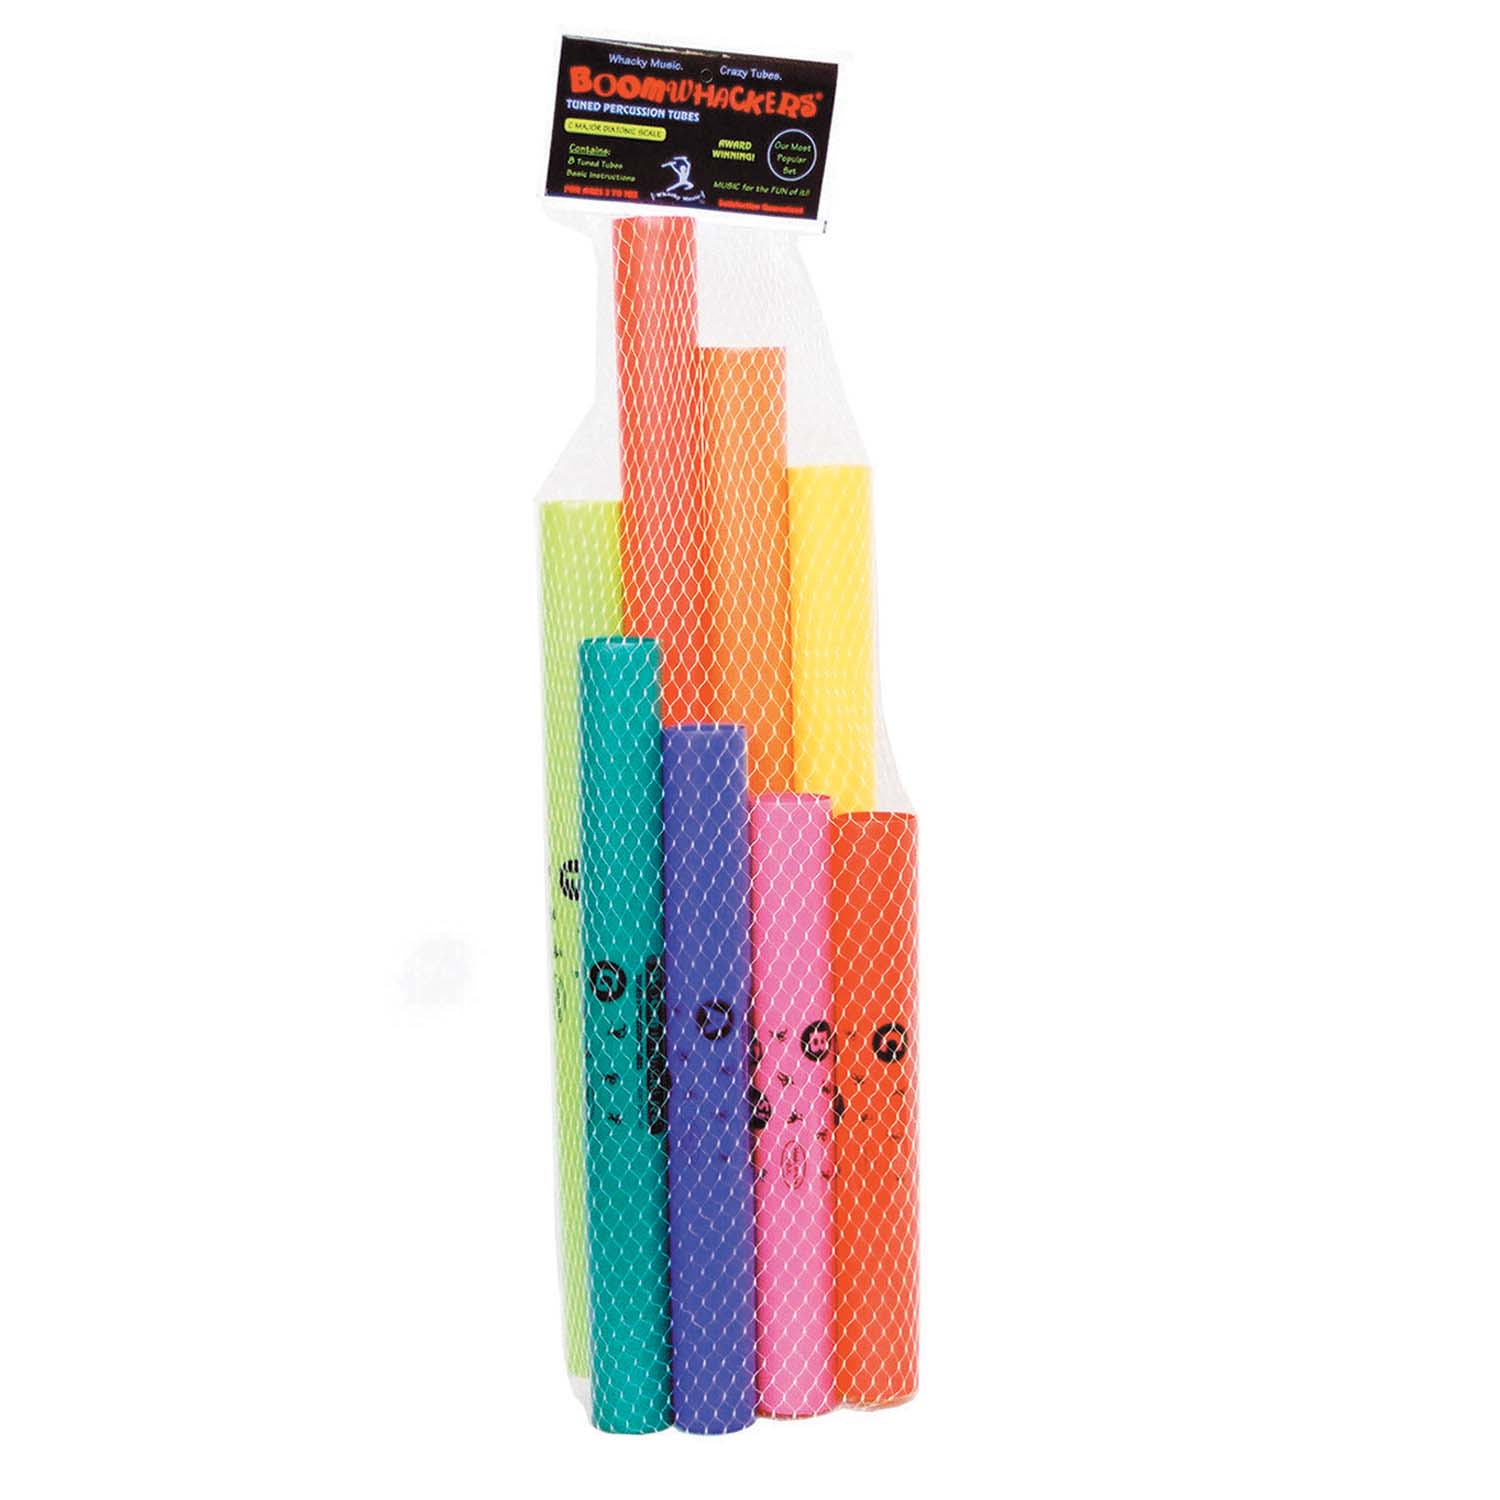 8-Note Boomwhackers®